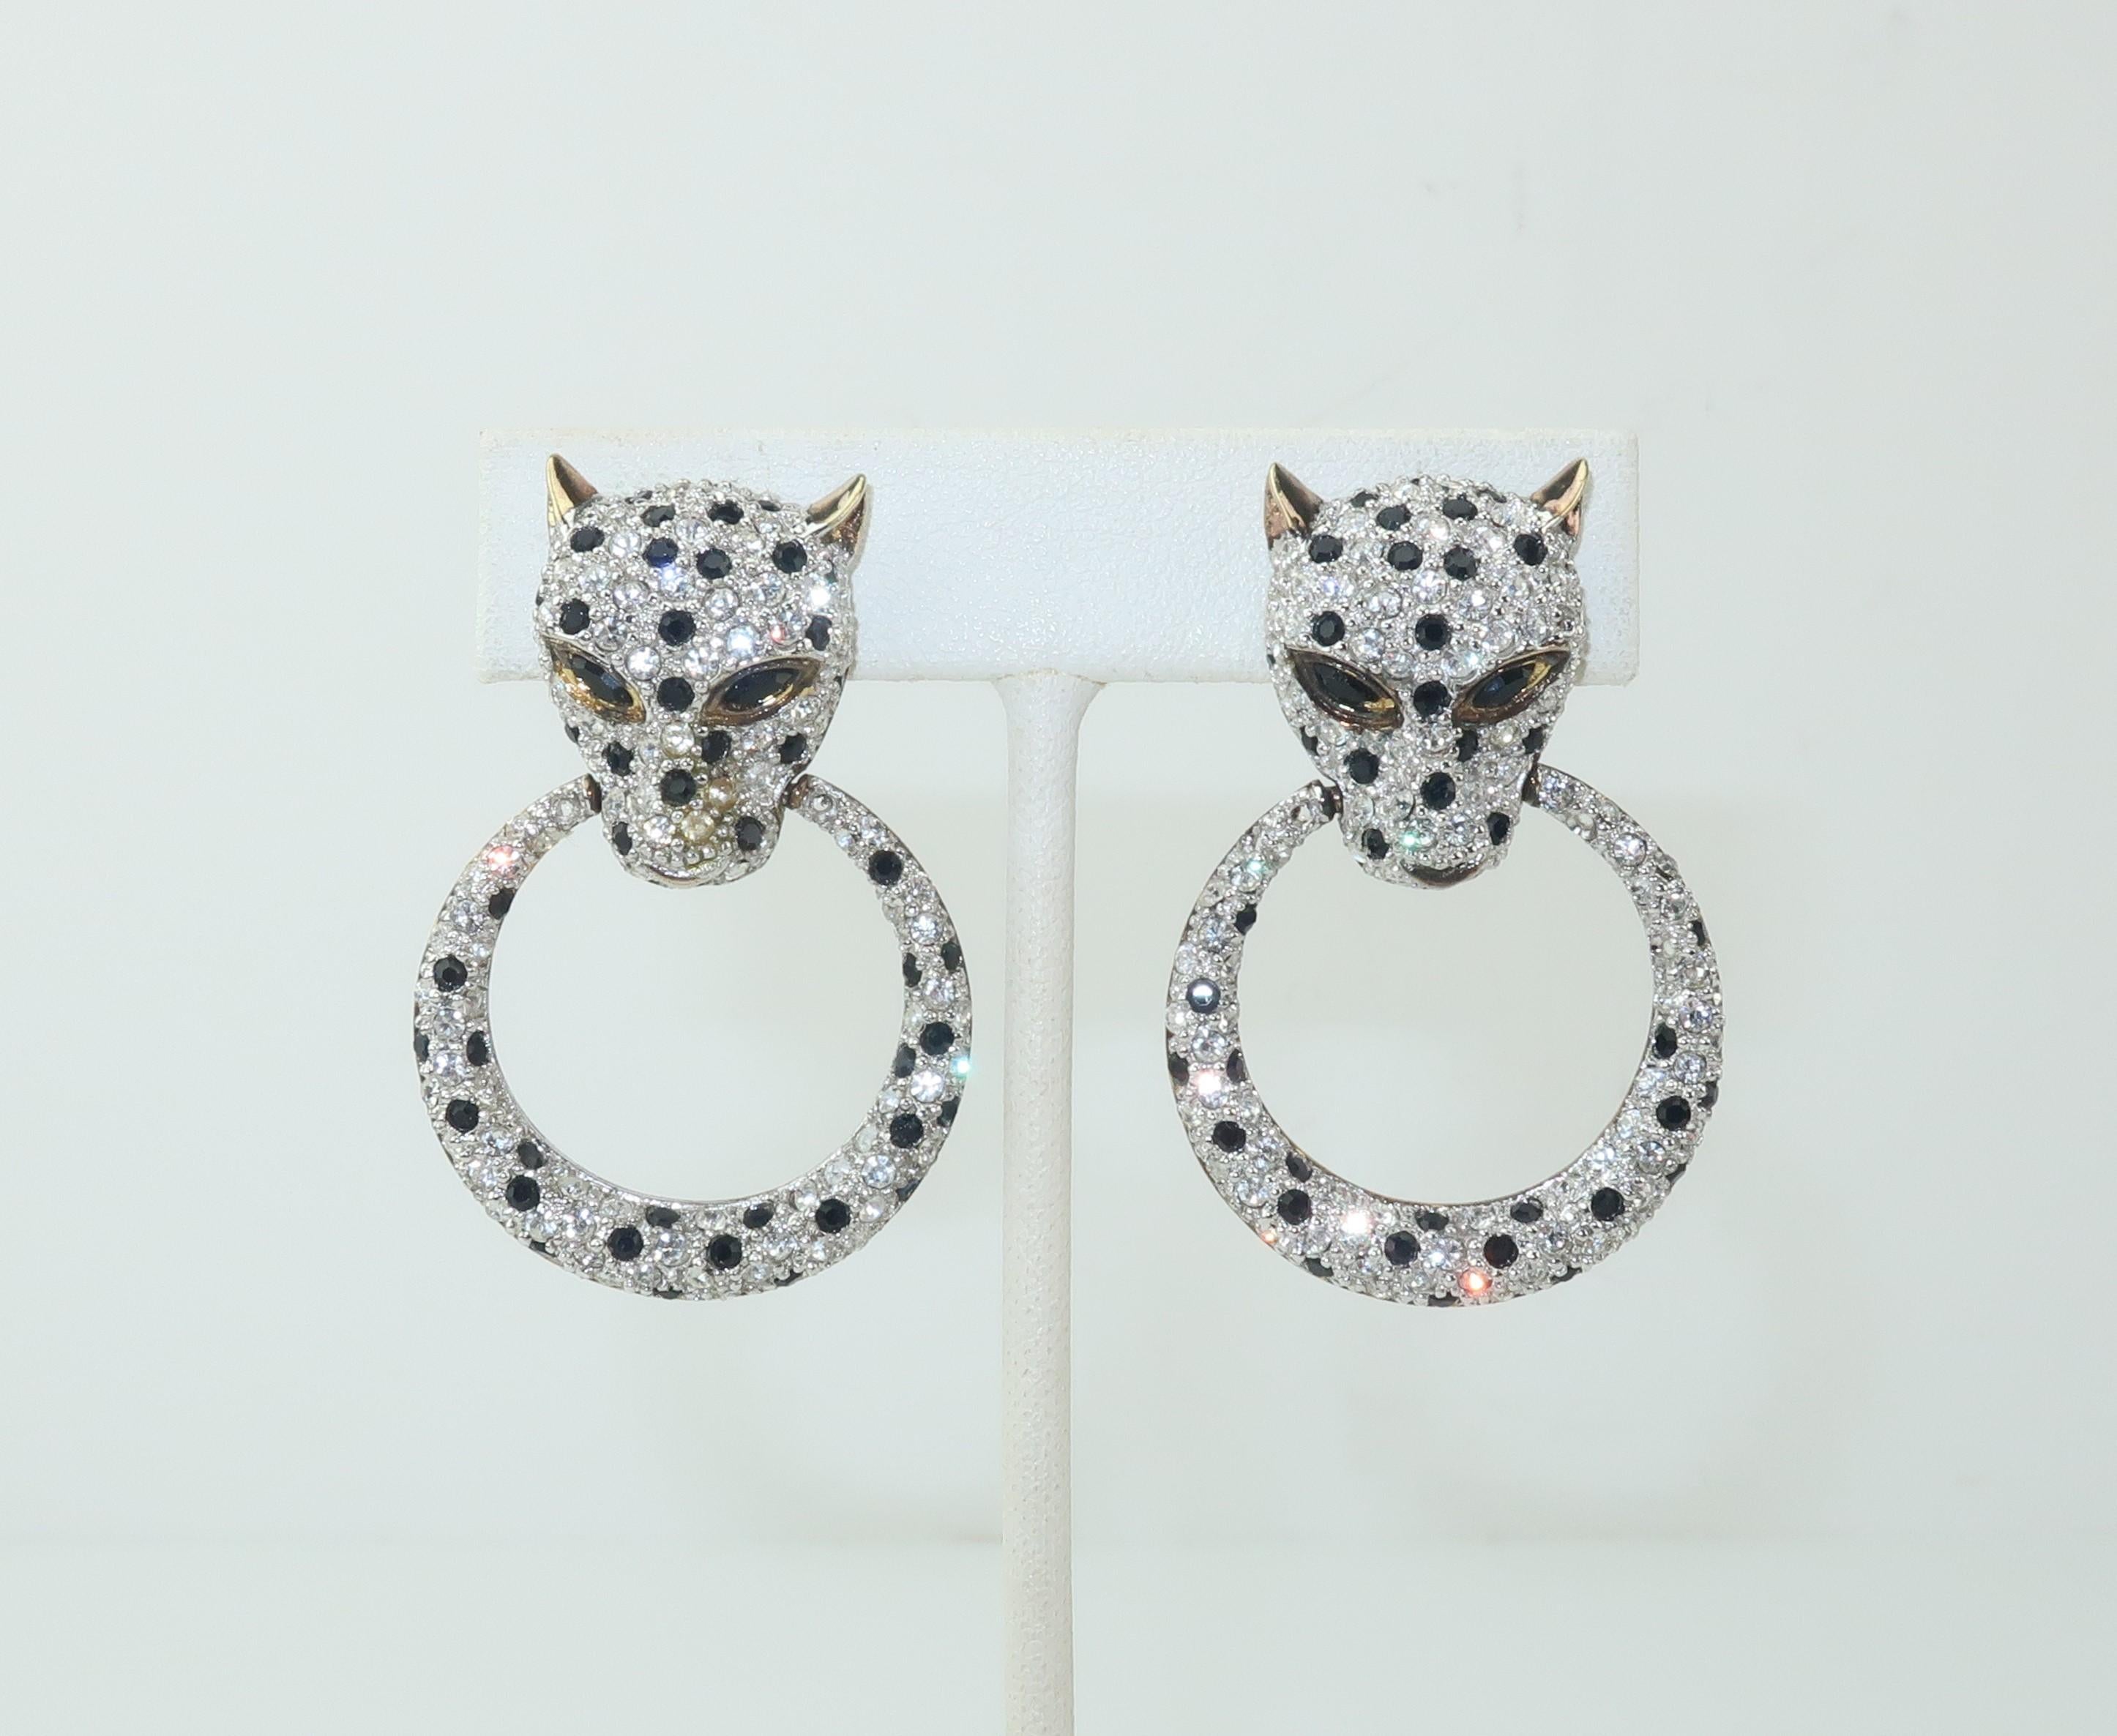 These C.1980 clip on earrings are fabricated from gilt sterling silver and feature leopards embellished with sparkling crystal clear and black rhinestones suspending articulated door knocker rings.  ‘Purrrrfect’ for adding a glamorous touch to your